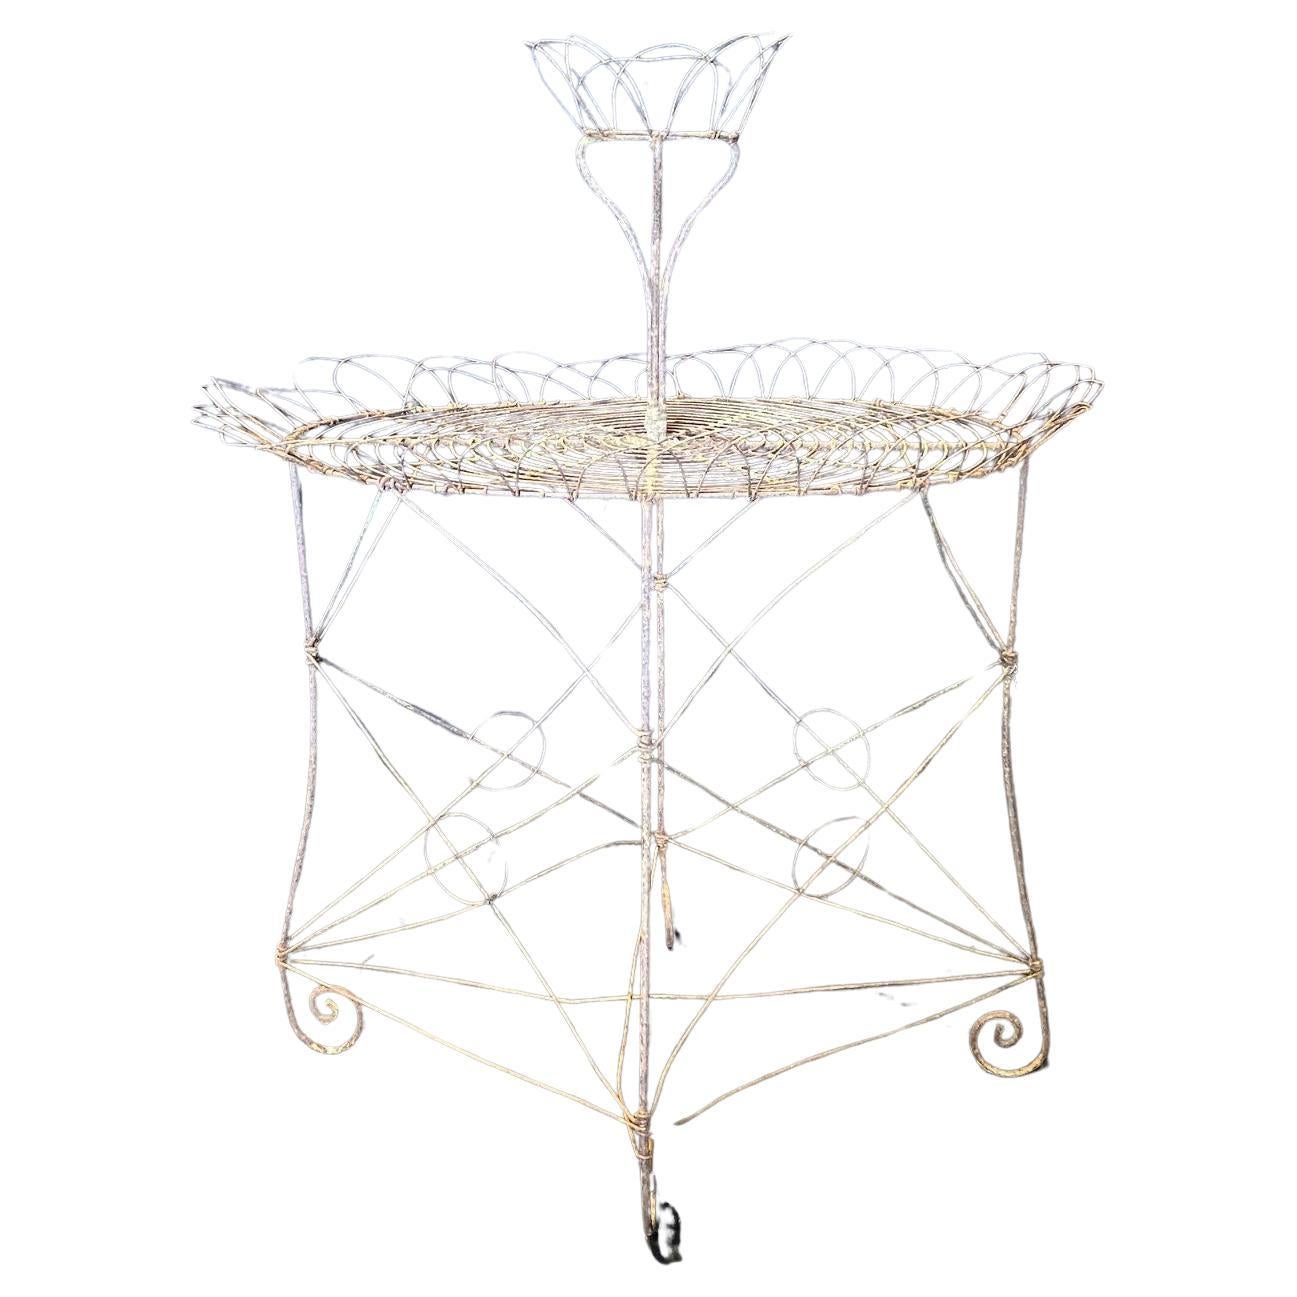  English Large Victorian White Wire and Metal Two Tier Iron Garden Plant Stand